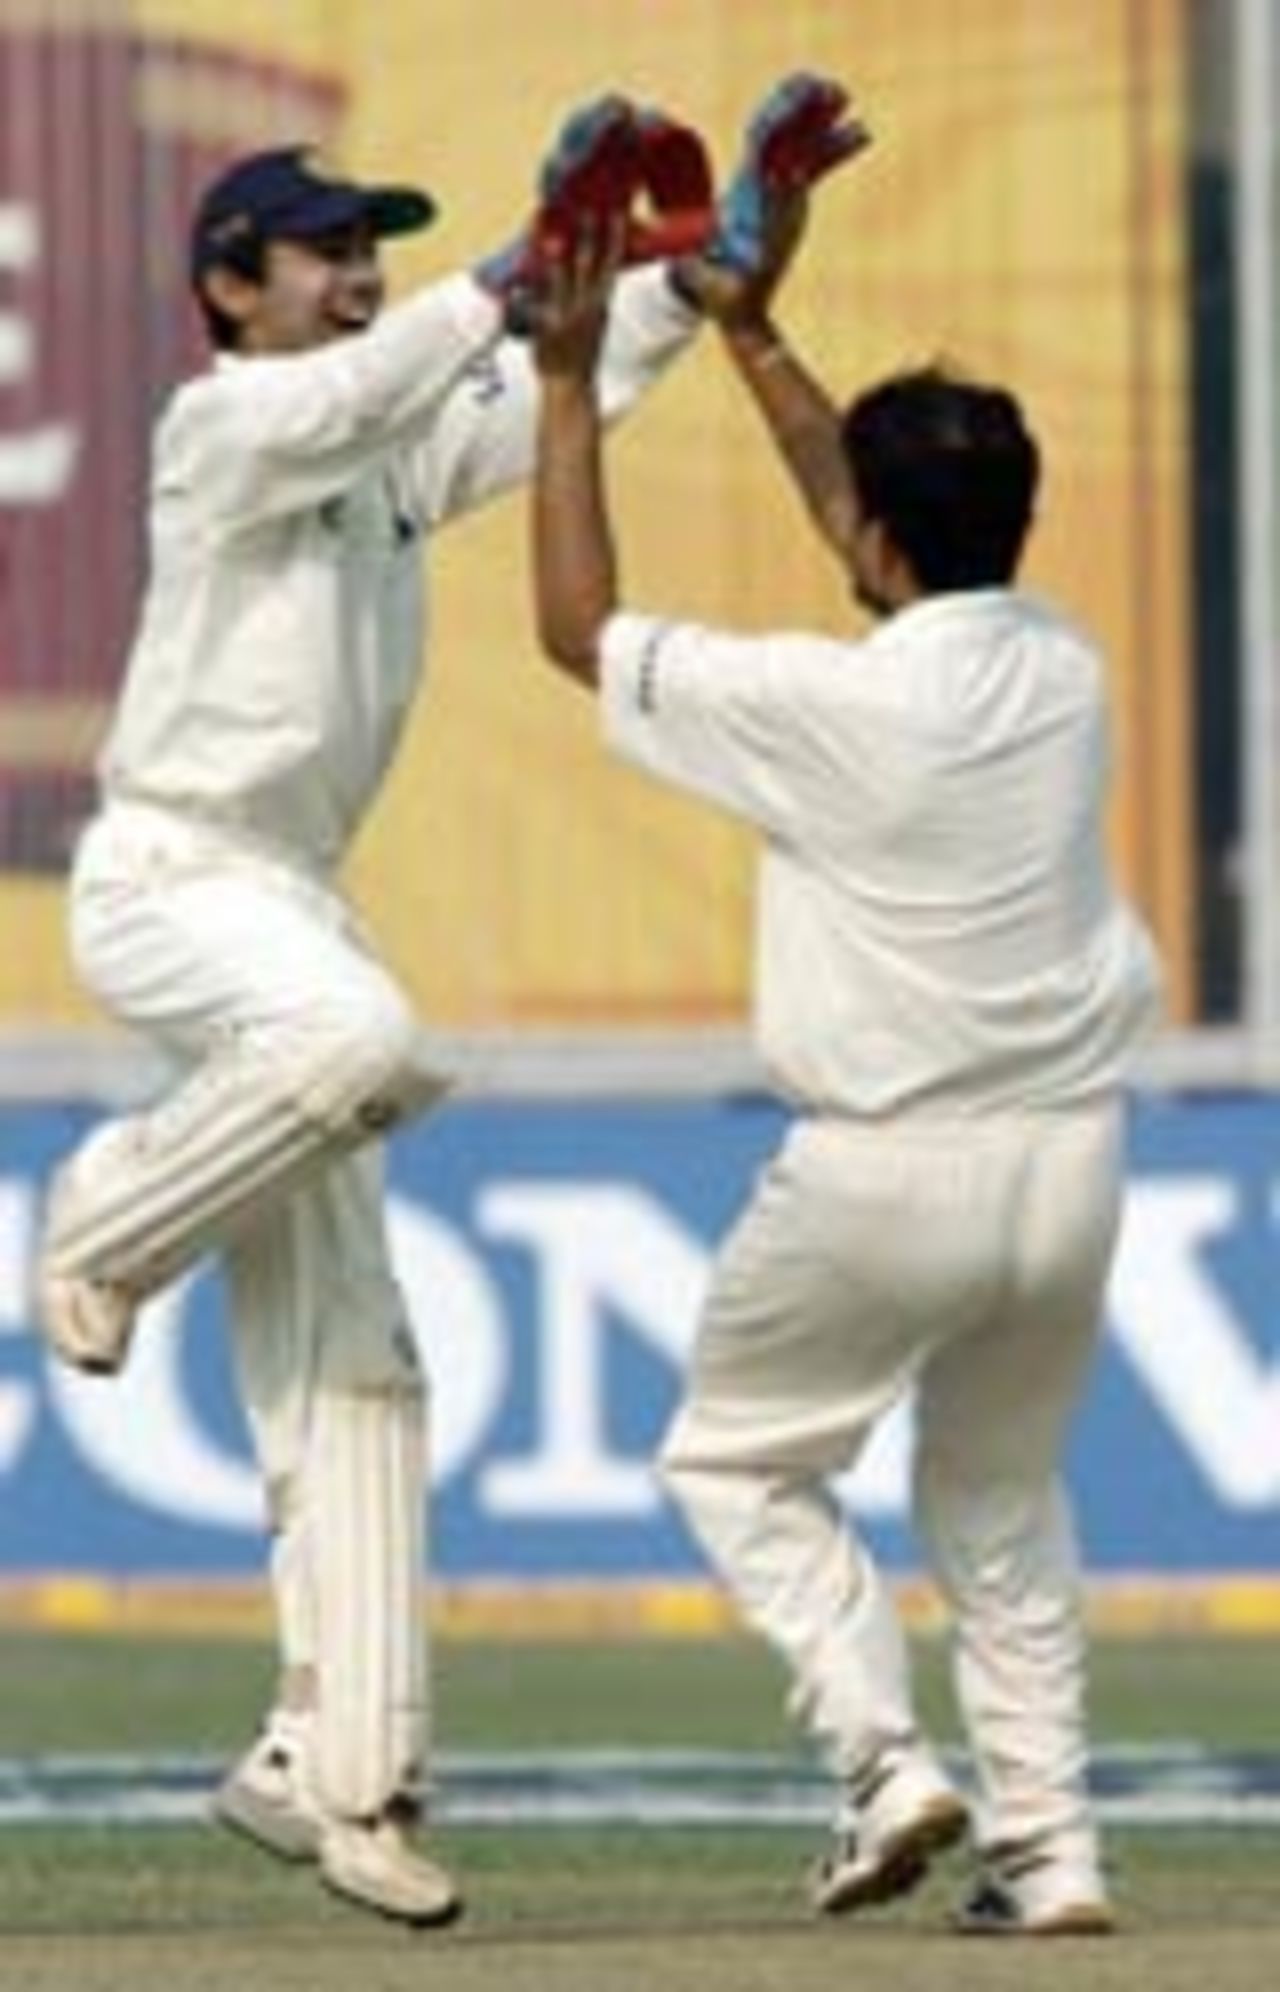 Sourav Ganguly and Dinesh Kaarthick celebrate, 2nd day, 1st Test, Kanpur, India v South Africa, November 21 2004